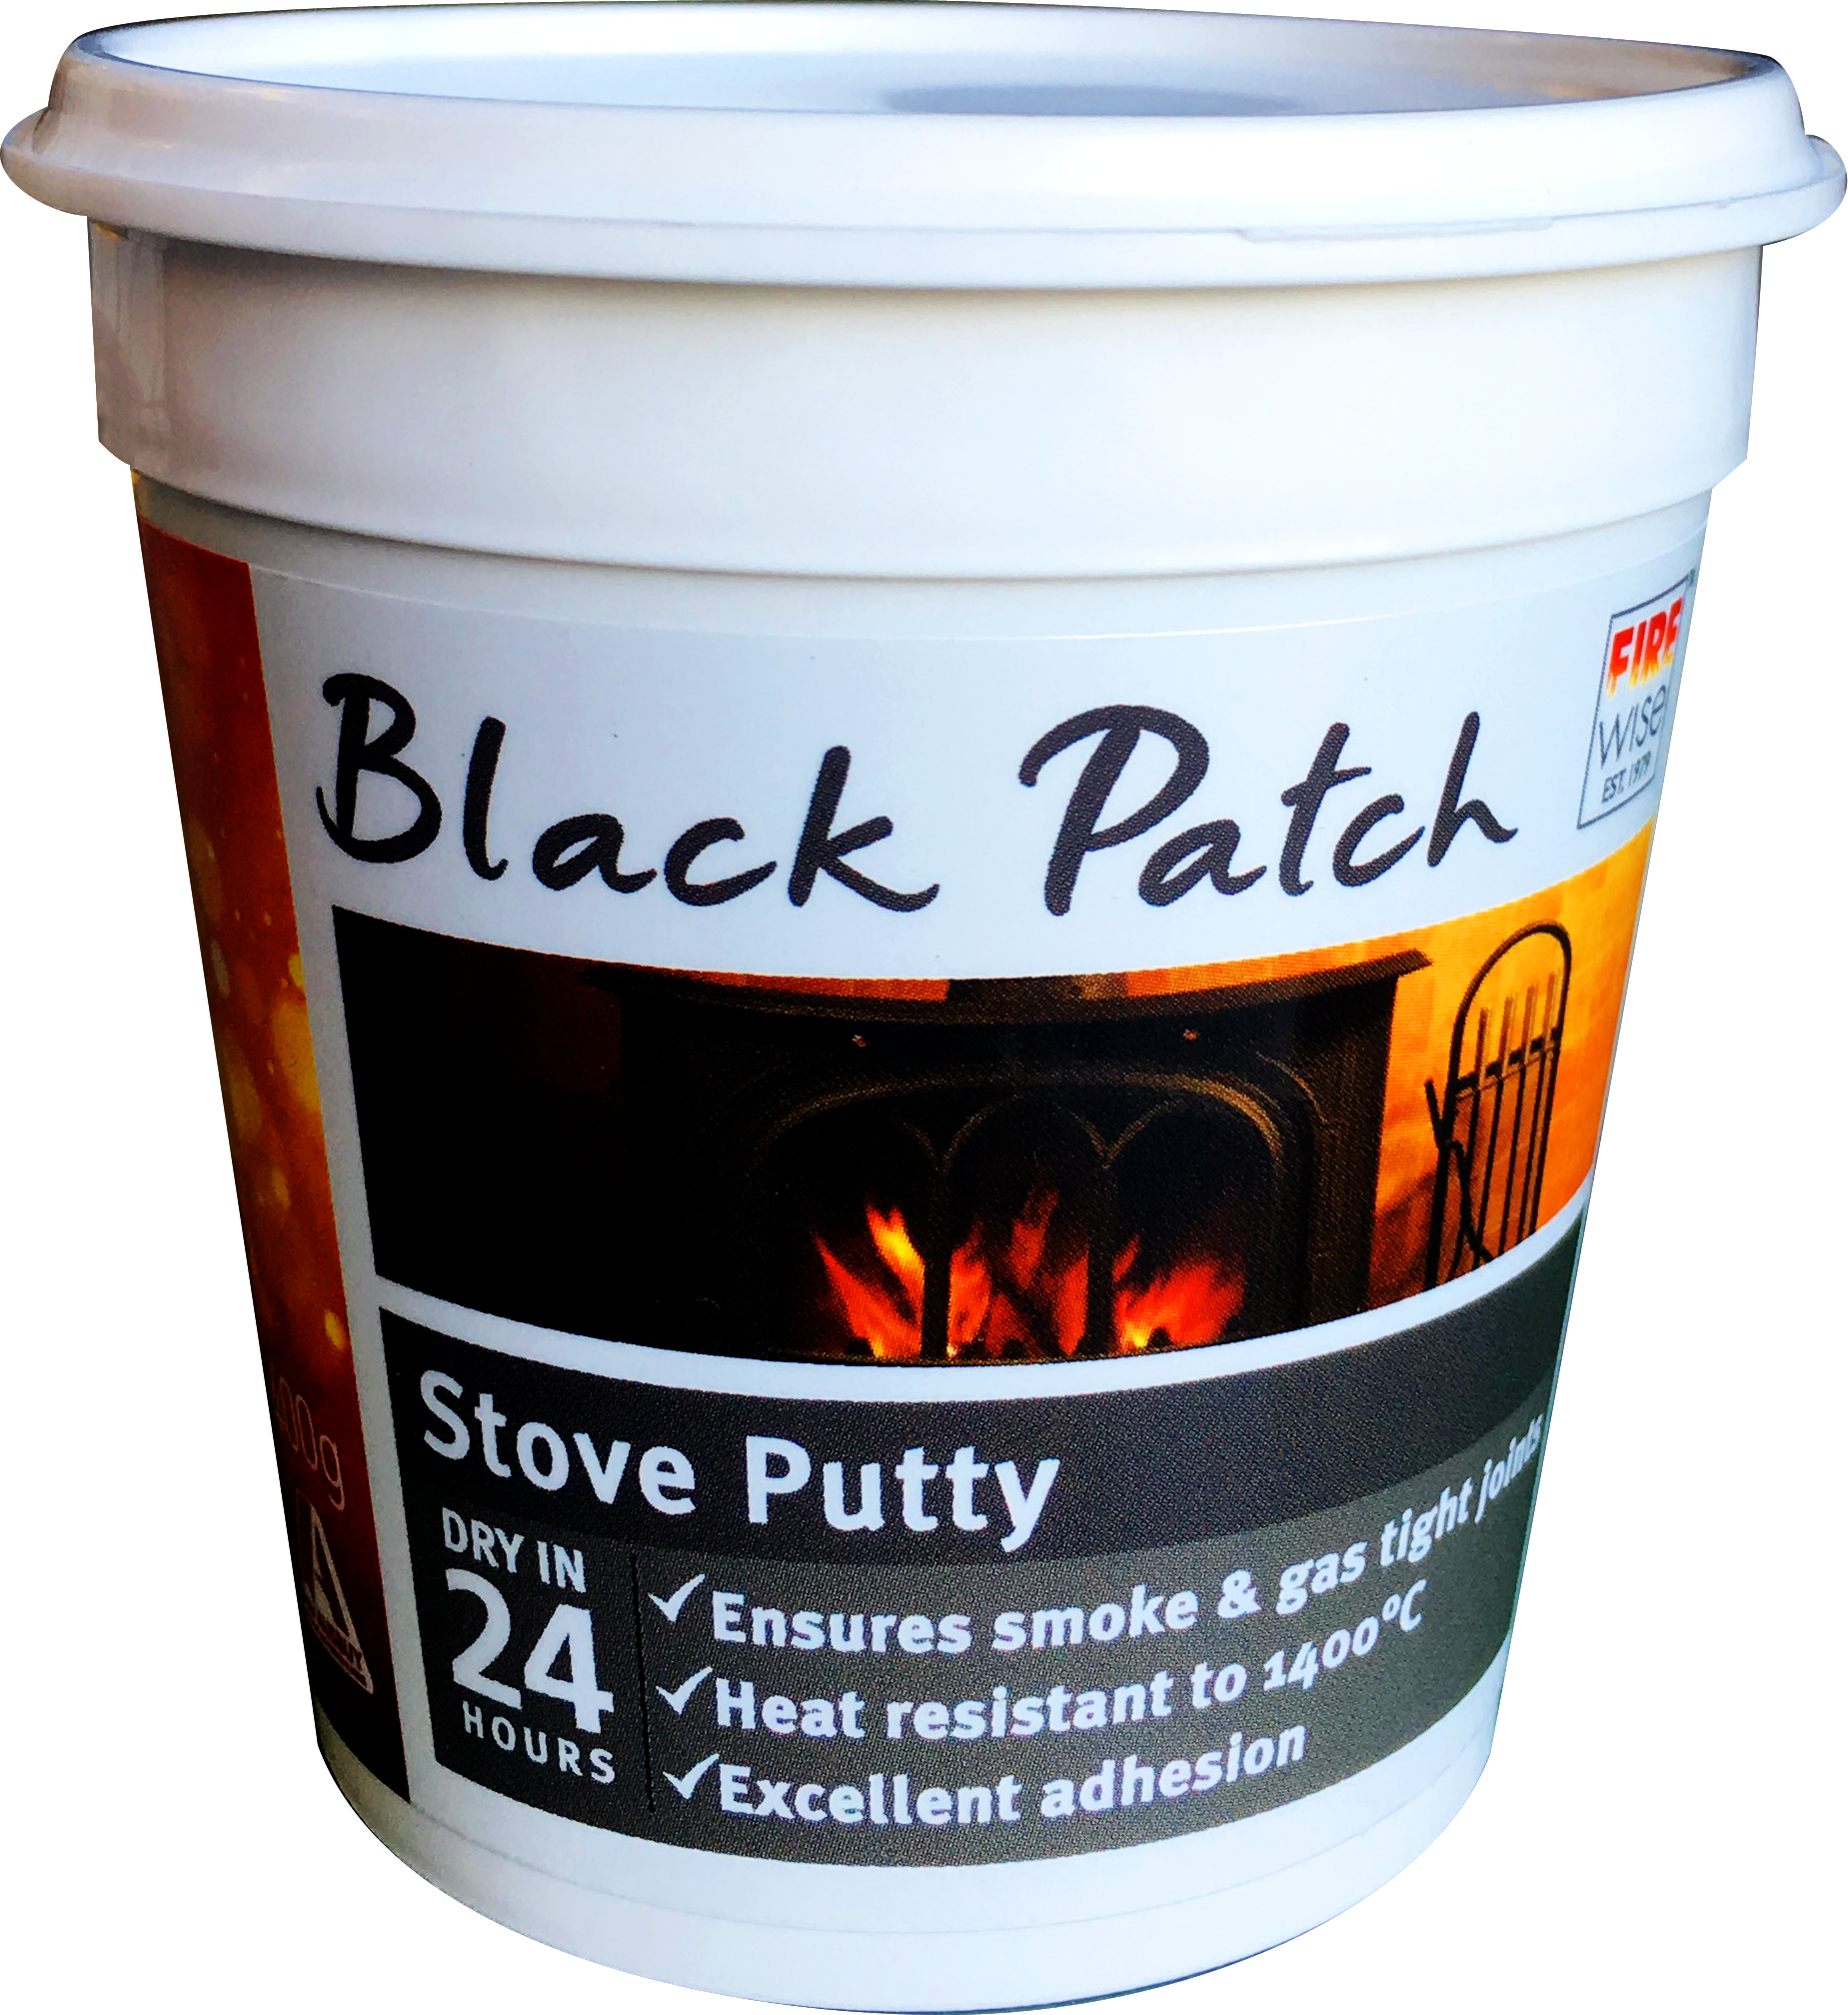 Firewise Black Patch Stove Putty - 500g